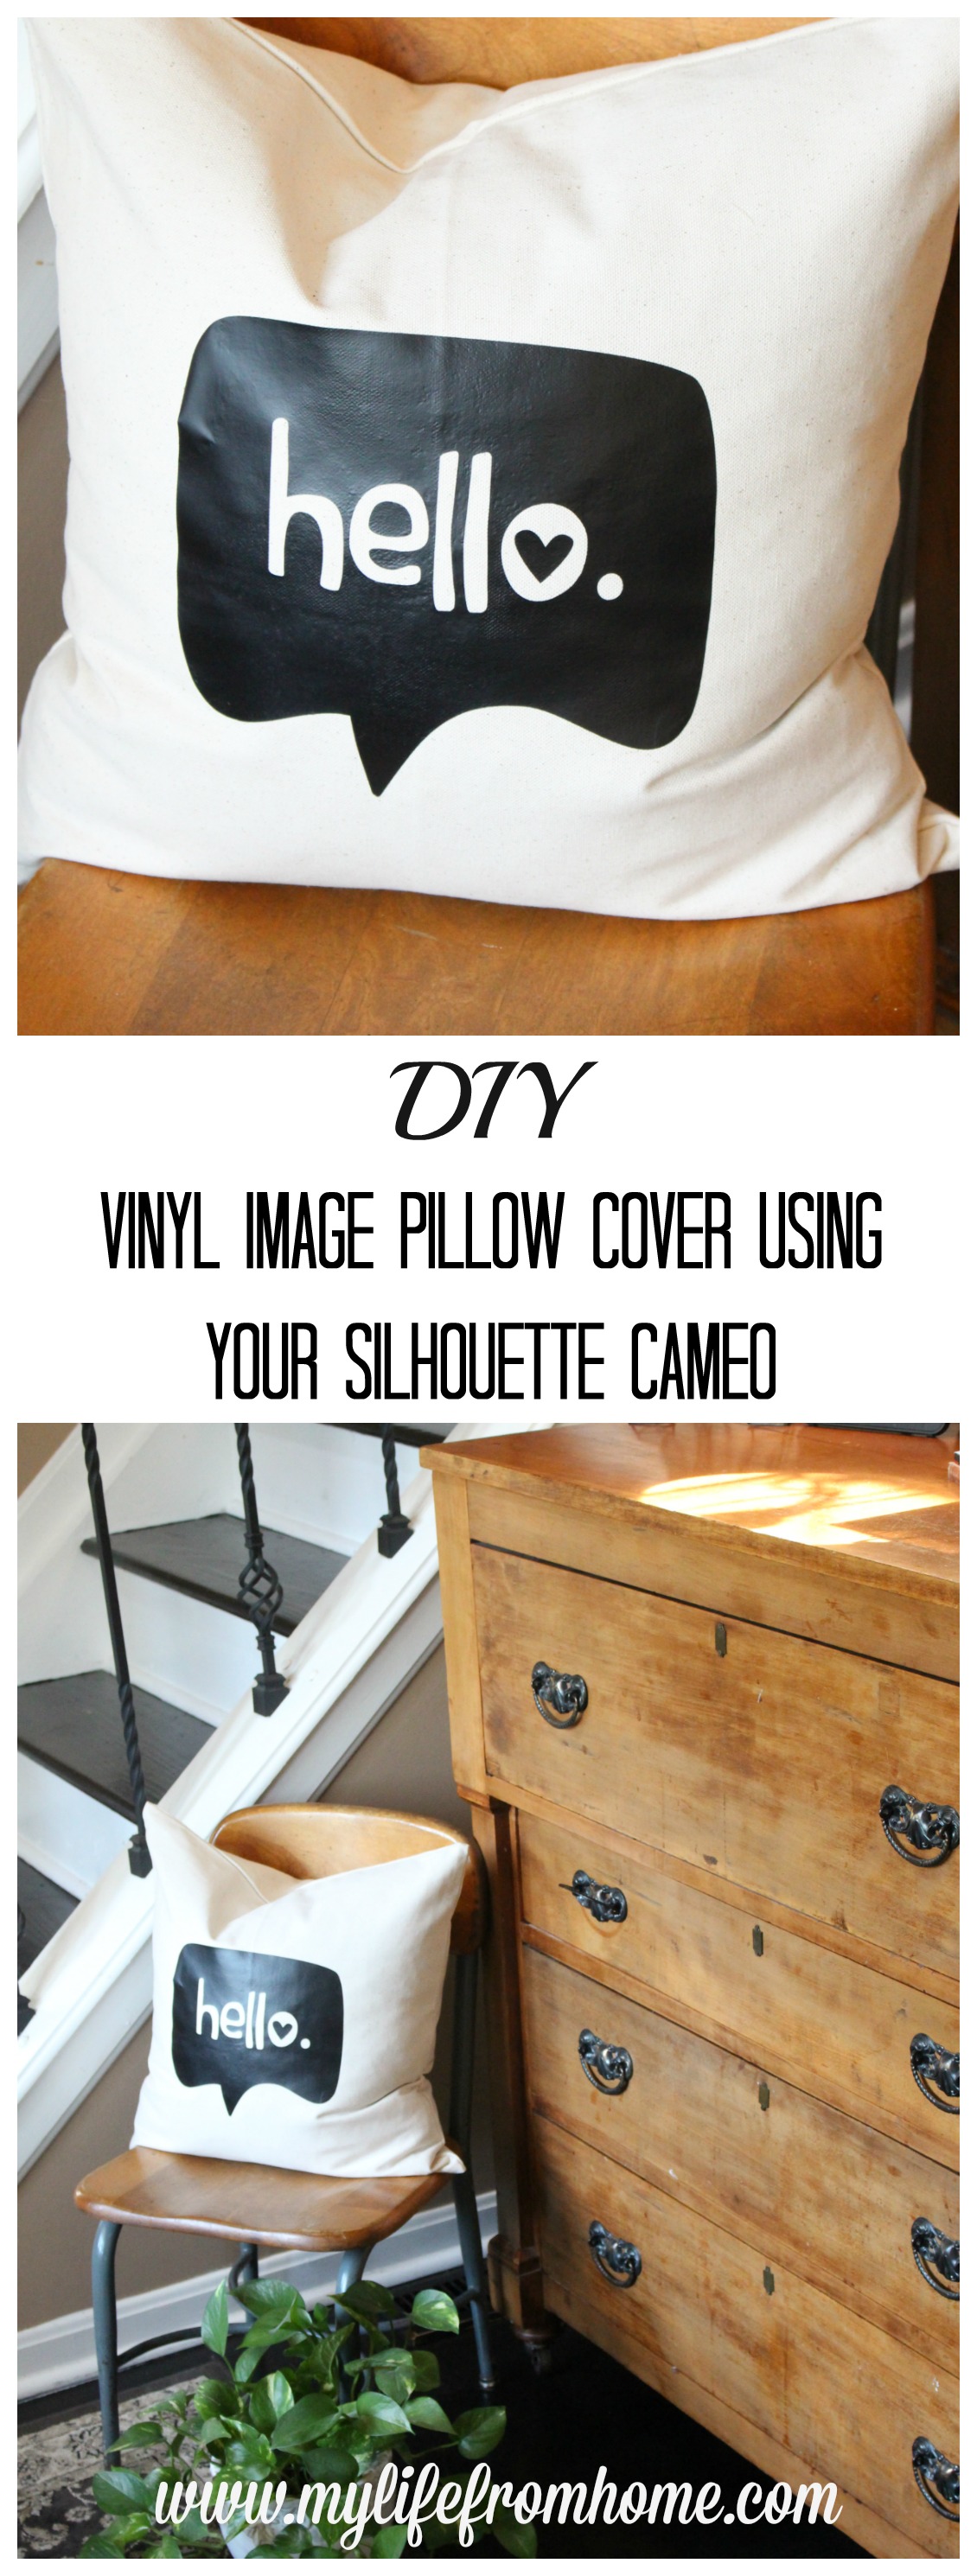 DIY Vinyl Image Pillow Cover Using Your Silhouette Cameo Silhouette Cameo Projects Pillow Cover Projects decor using vinyl Pillow Cover Projects